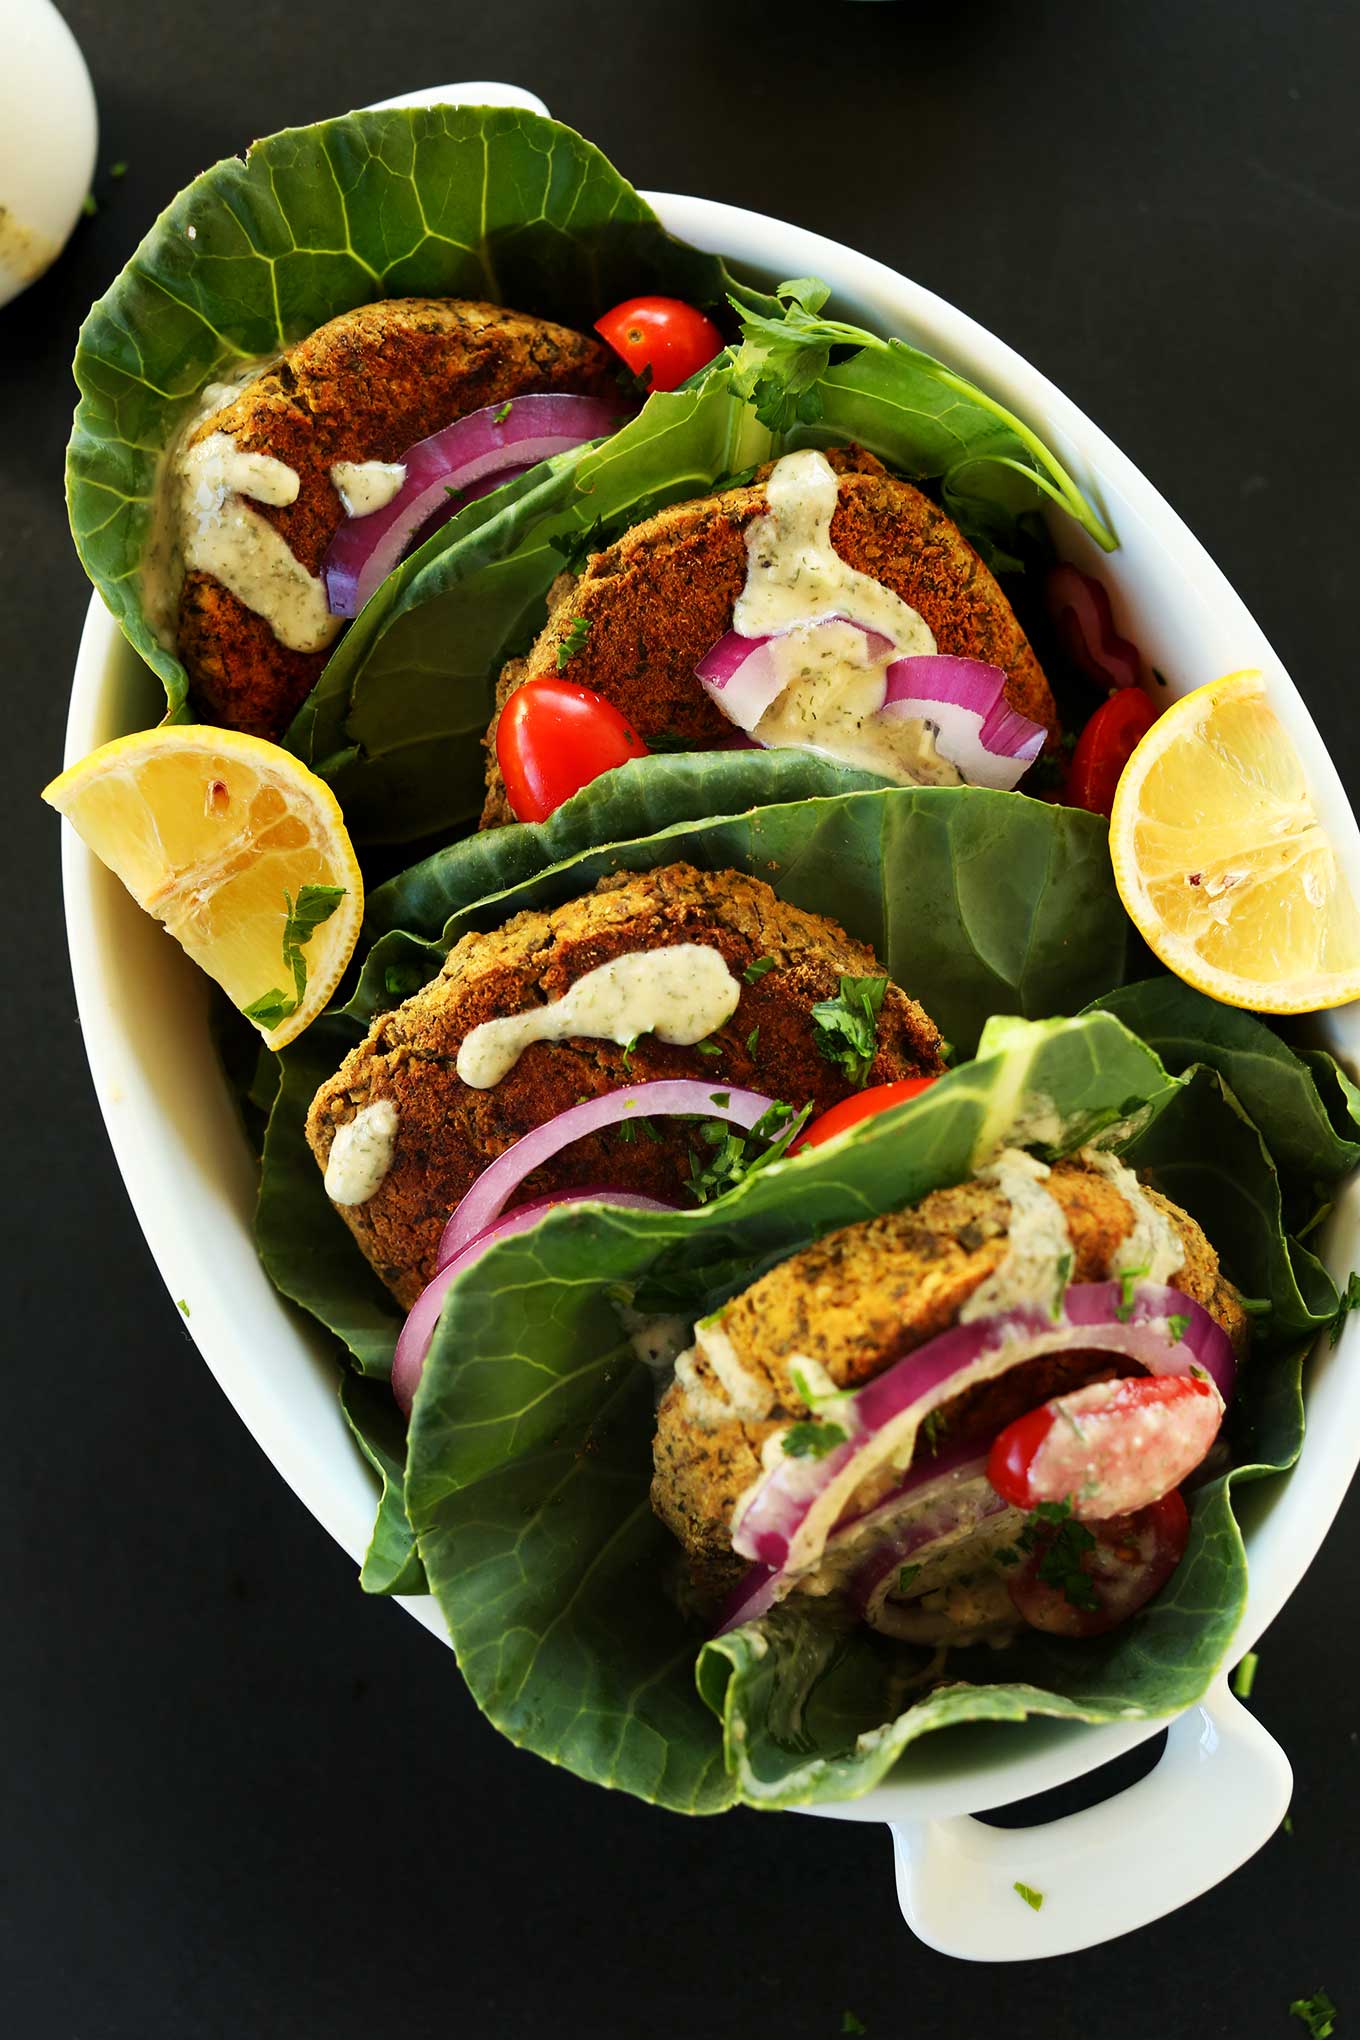 Healthy, Simple BAKED Falafel Burgers! Perfect on greens or pita with a simple hummus-garlic sauce! #vegan